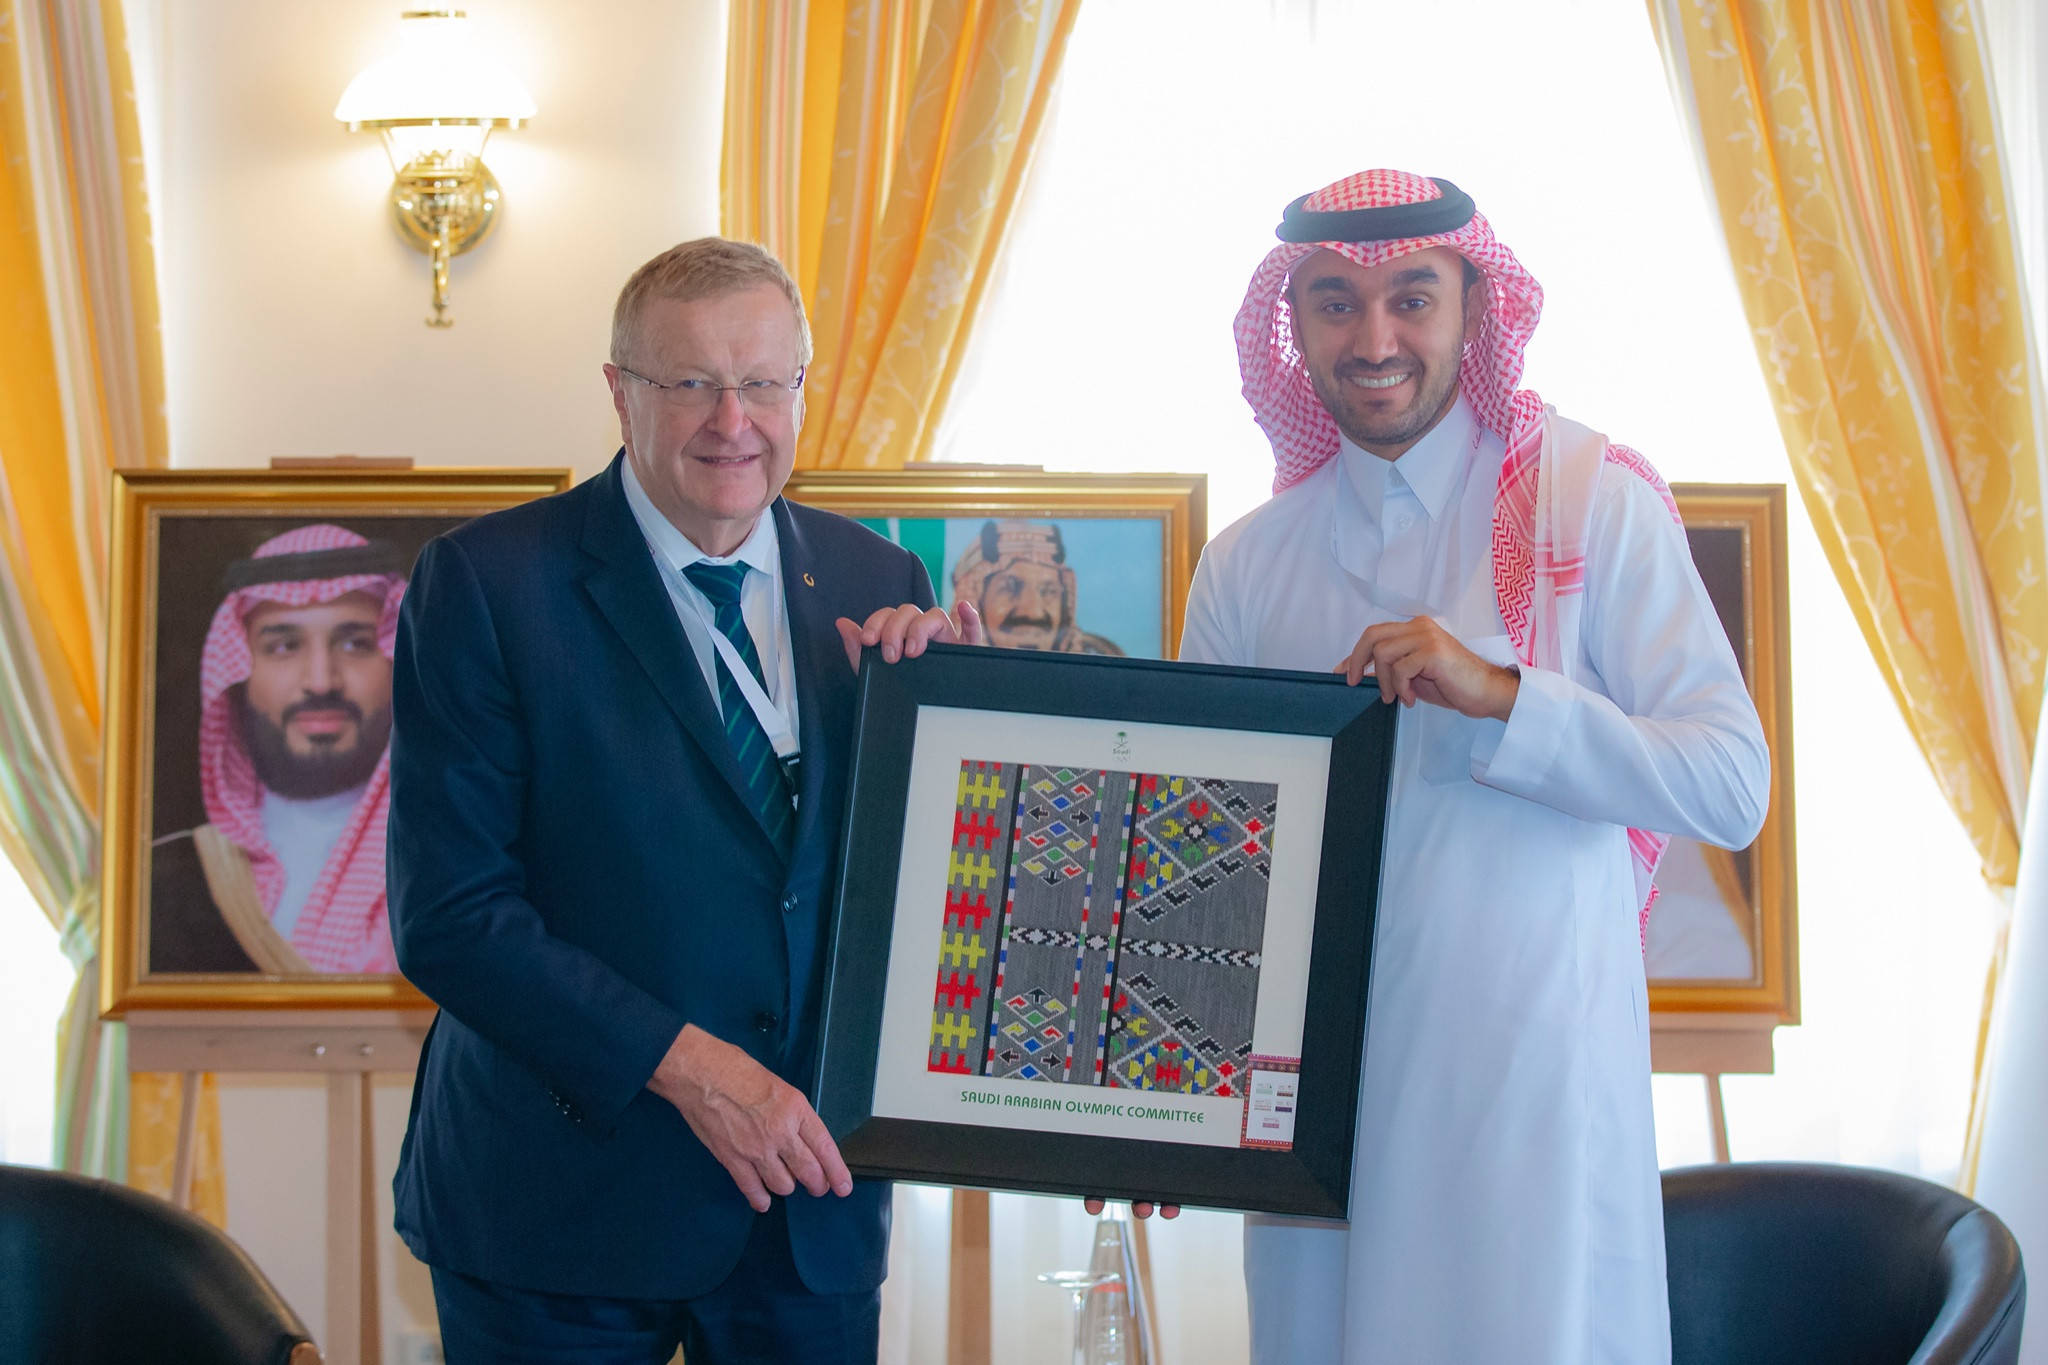 IOC vice-president John Coates met officials from the Saudi Arabia Olympic Committee on the sidelines of the Assembly ©ANOC